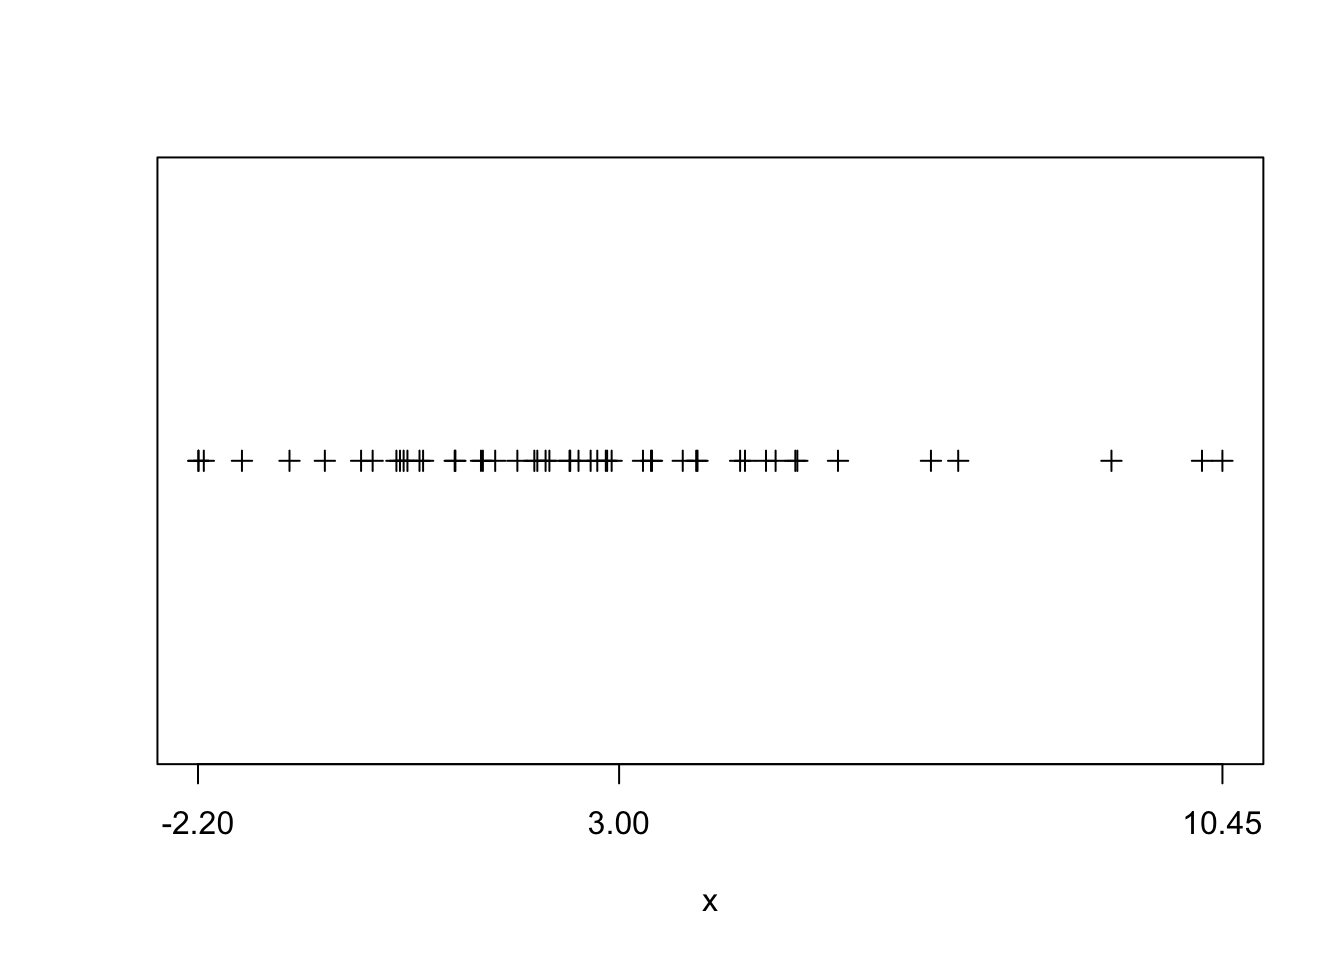 visual estimation on $\sigma$. The x-axis labels min and max as well as mean of $x$.